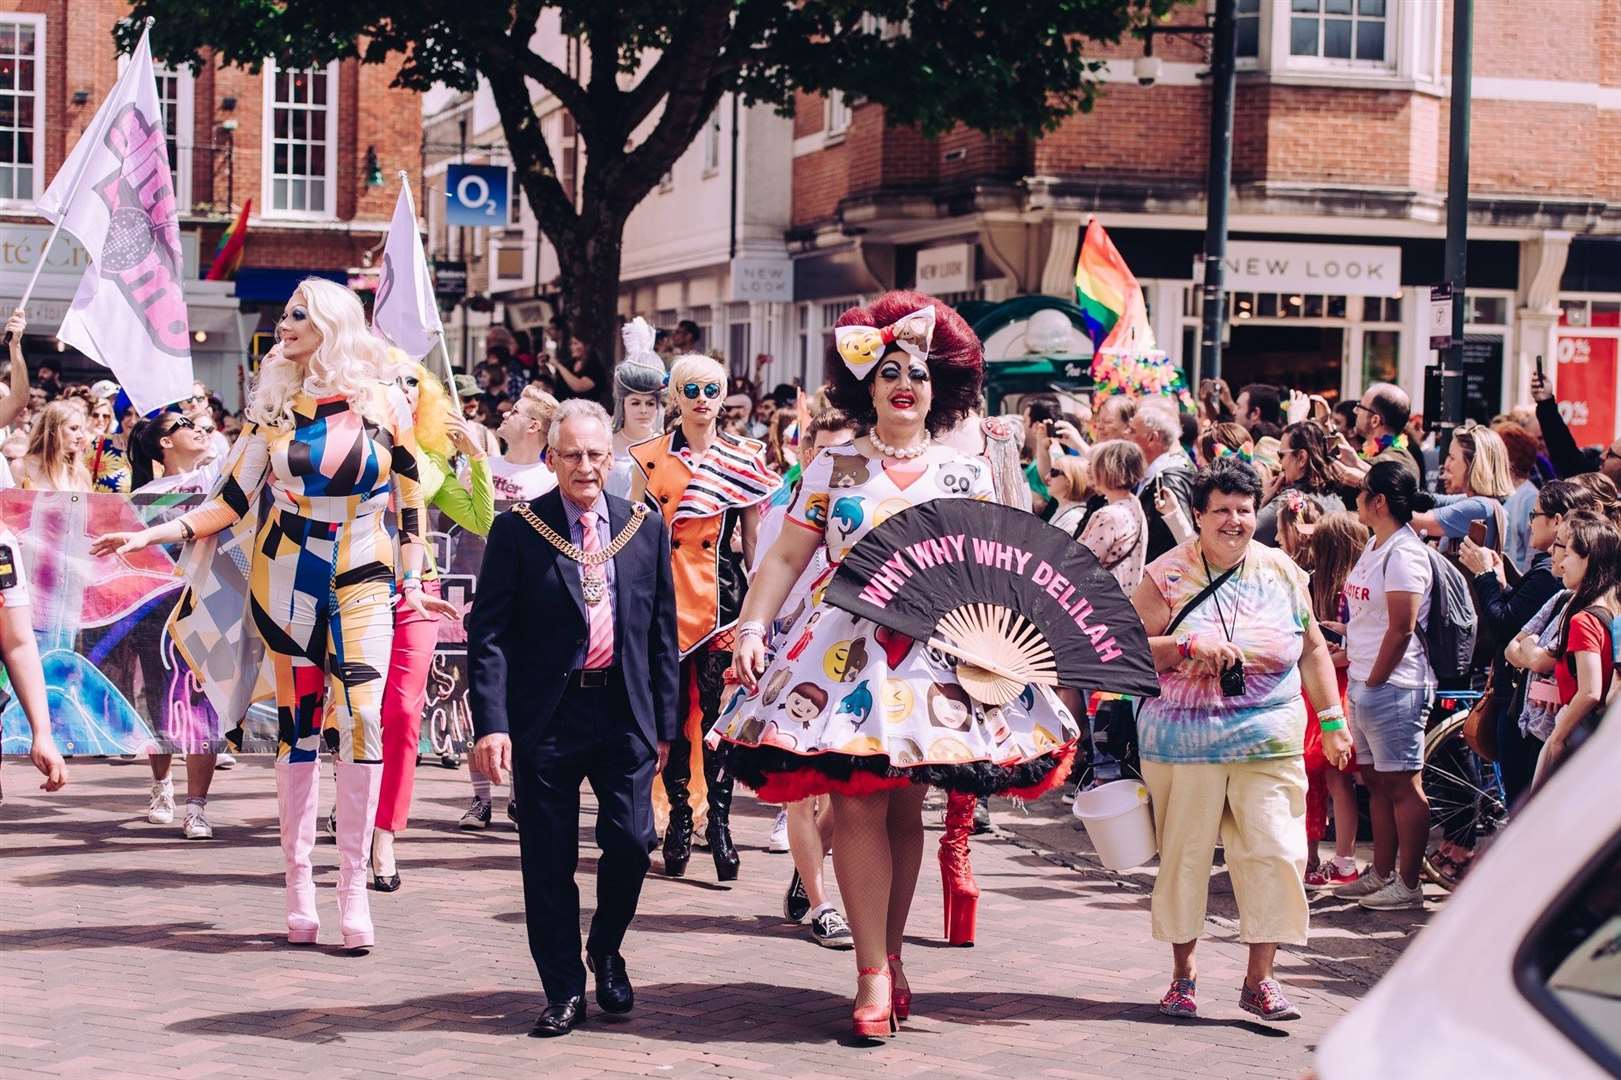 A previous Canterbury Pride makes its way through the streets